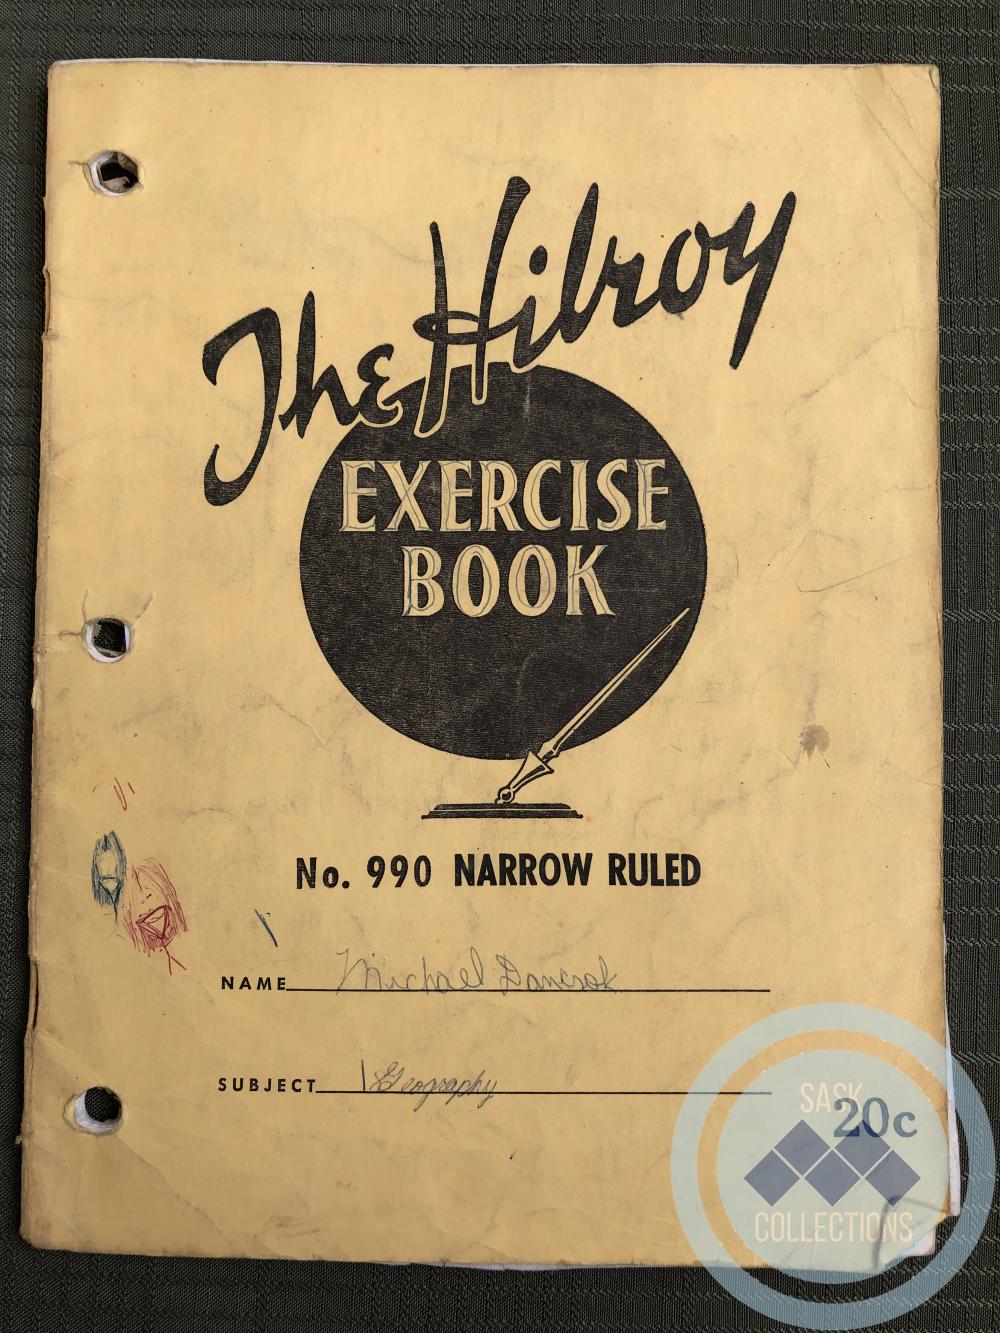 Exercise Book - Hilroy - Geography